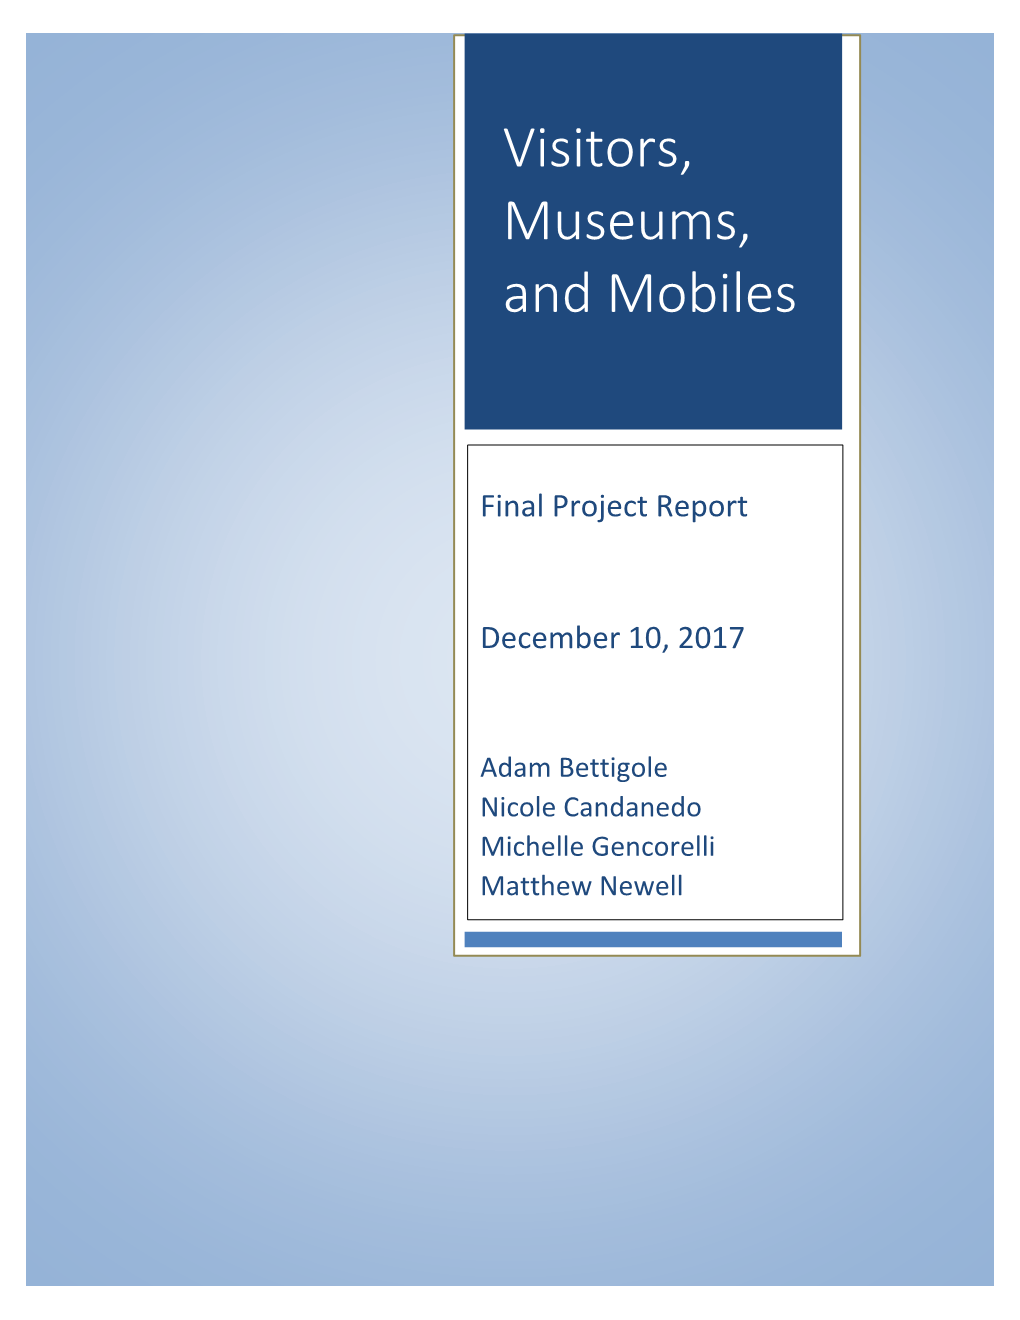 Visitors, Museums, and Mobiles